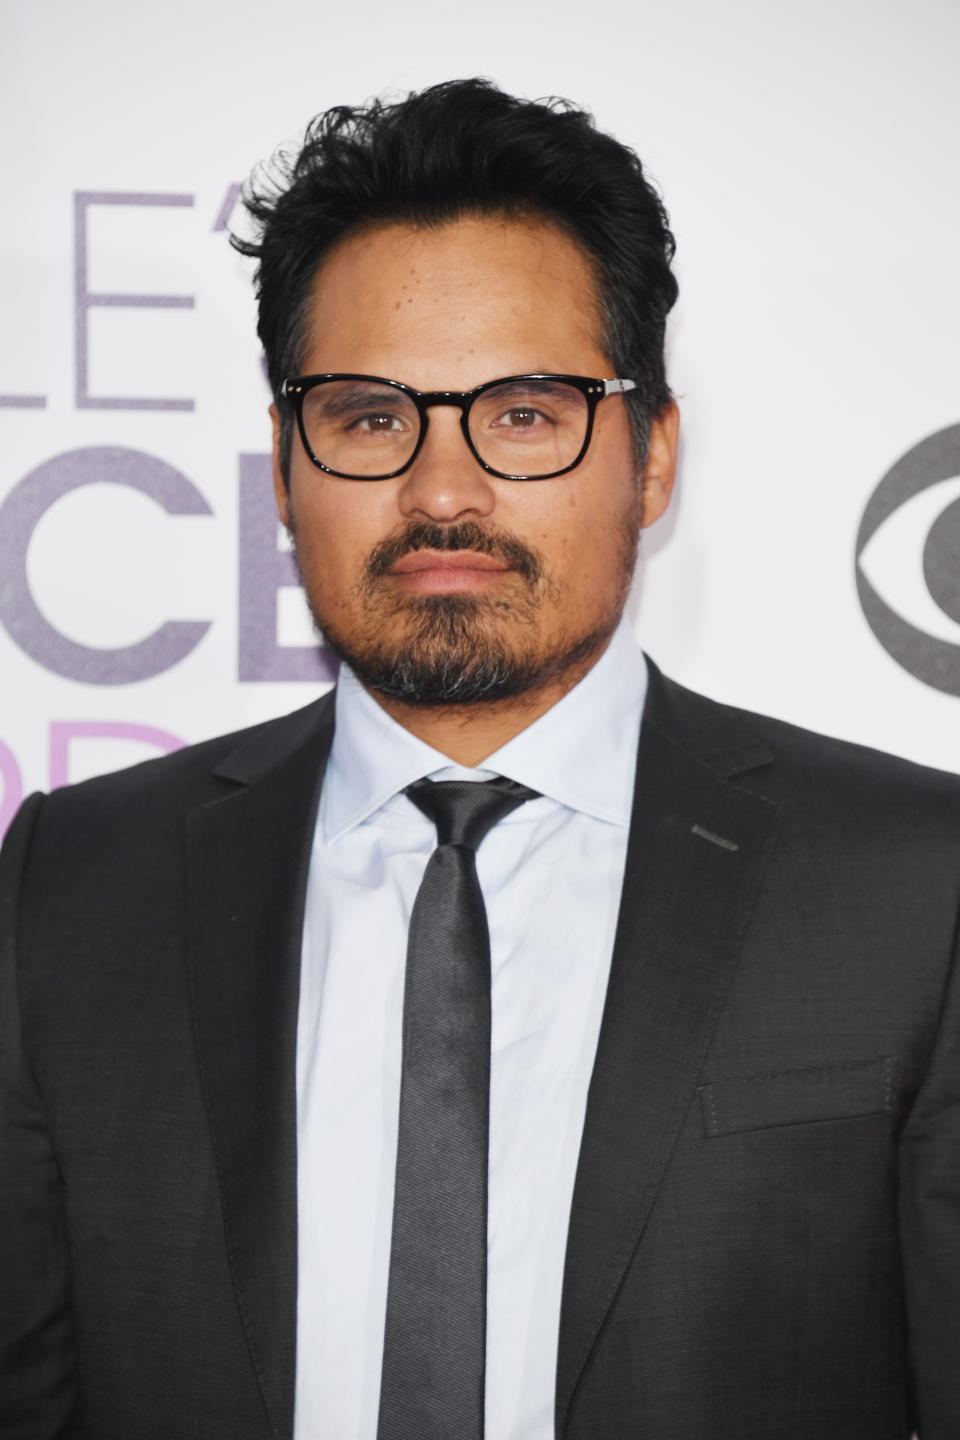 Michael Pena's credits include "Dora and the Lost City of Gold," "A Wrinkle in Time" and "CHIPS."